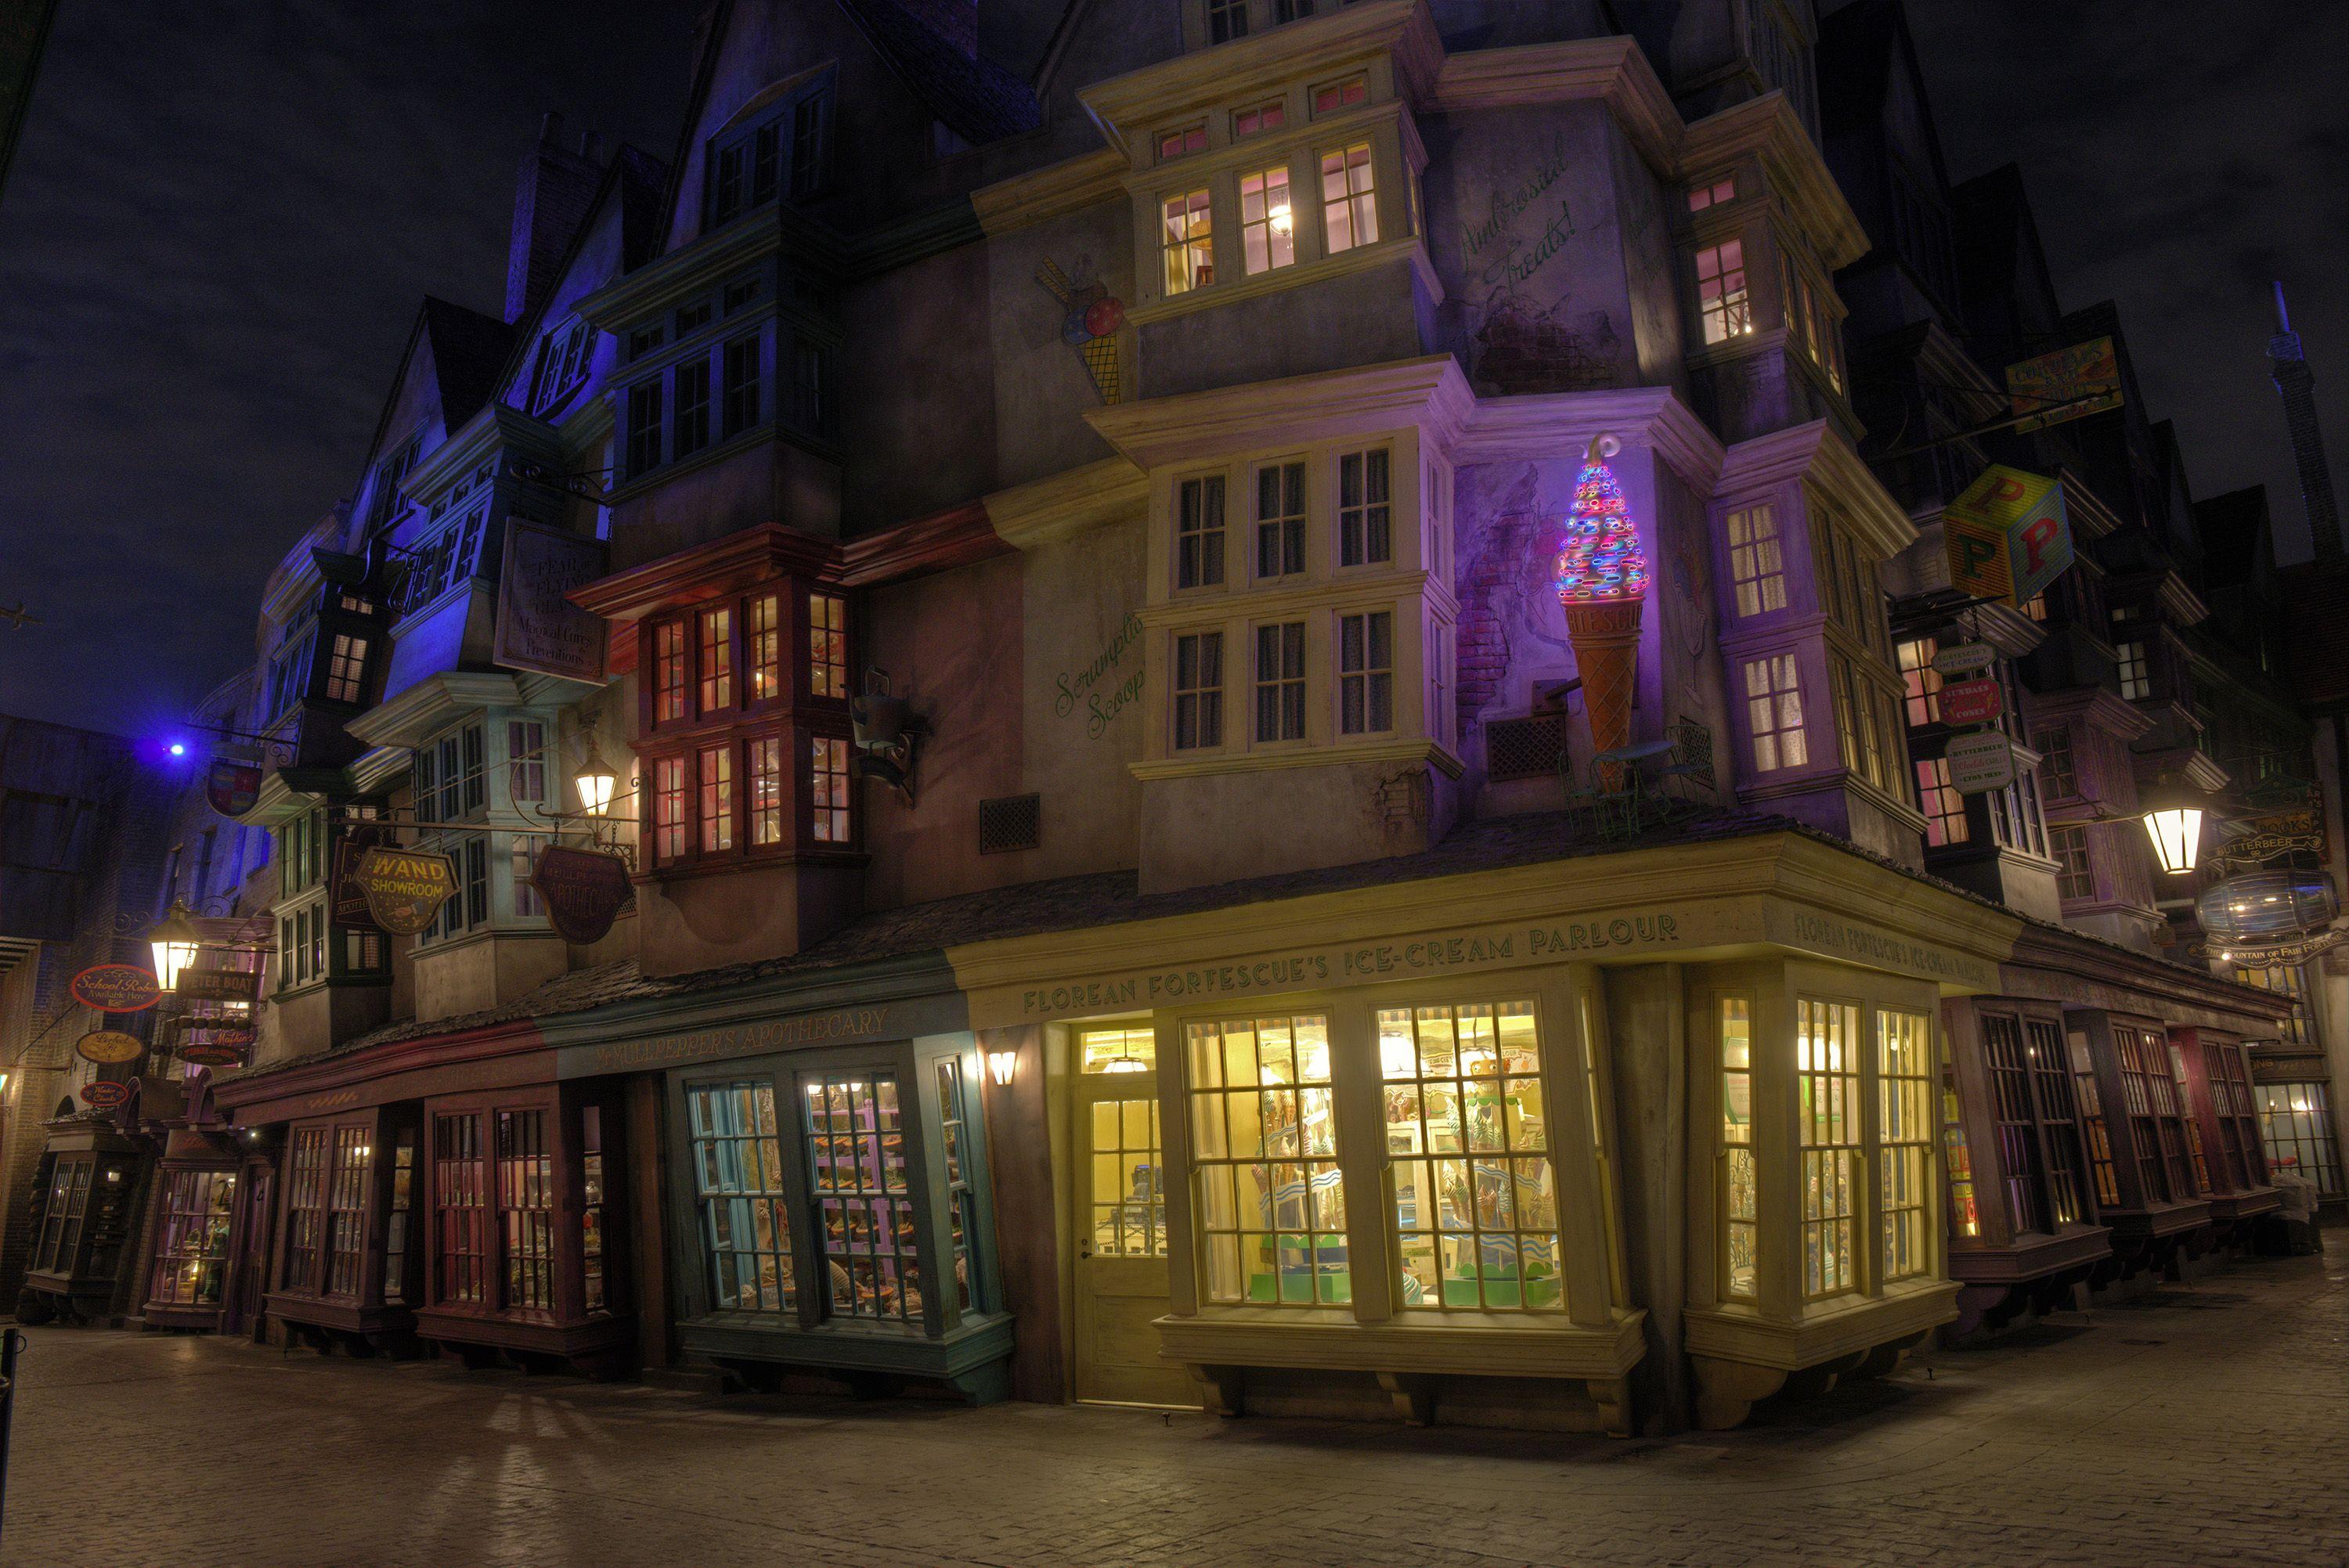 Harry Potter Diagon Alley Image from the New Theme Park Attraction.